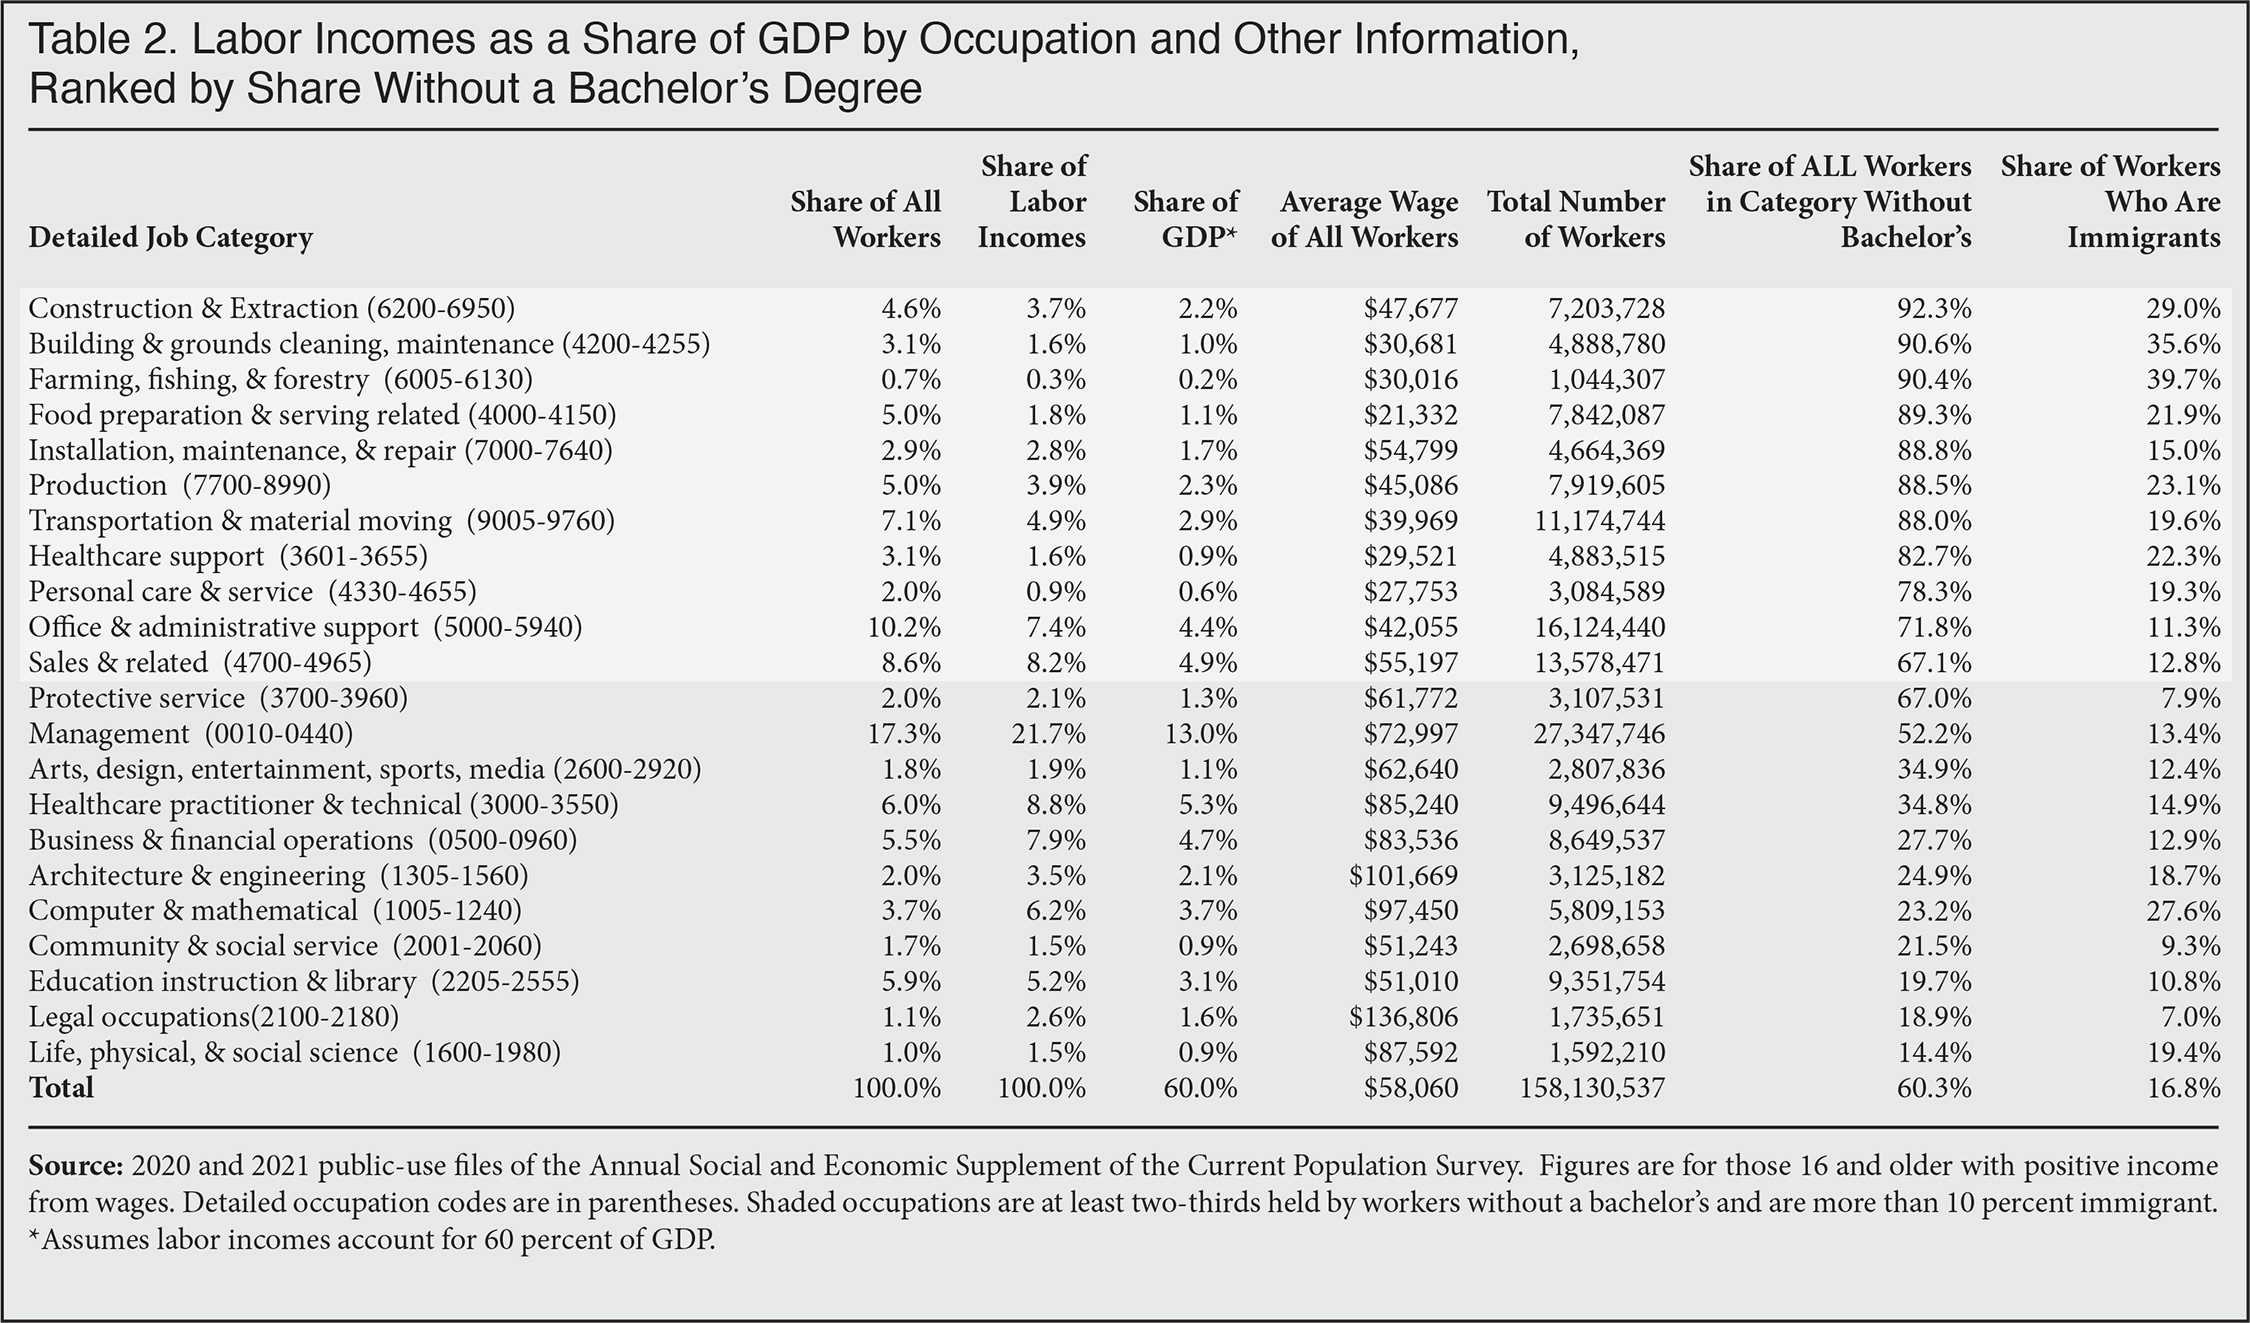 Table: Labor Incomes as a Share of GDP by Occupation and Other Information